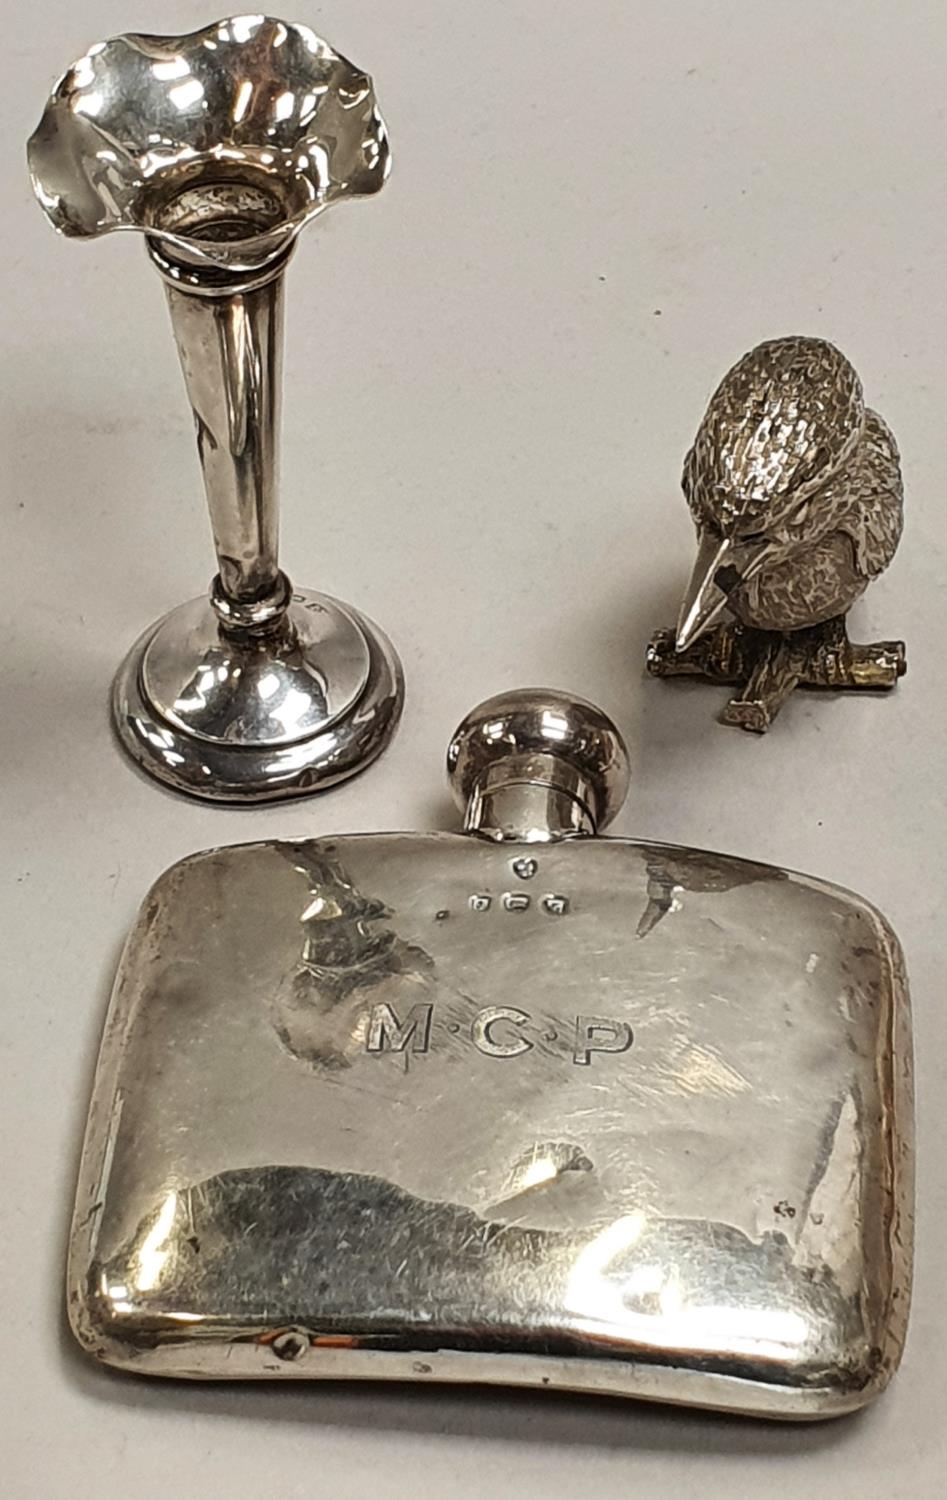 Silver plated Kookaburra ornament and two silver pieces.